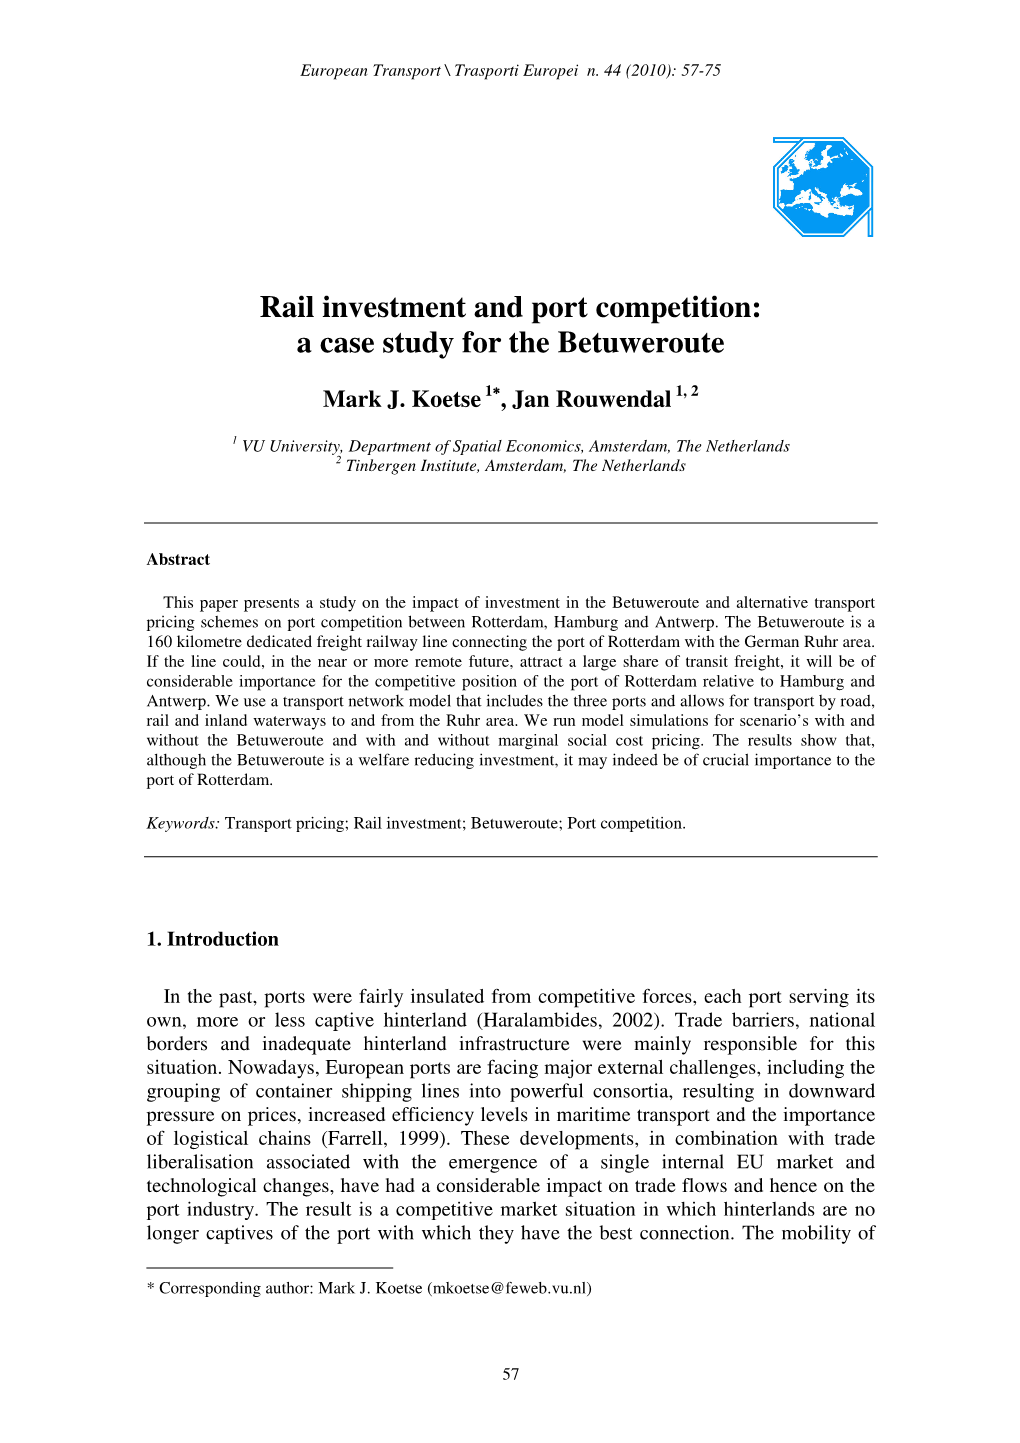 Rail Investment and Port Competition: a Case Study for the Betuweroute